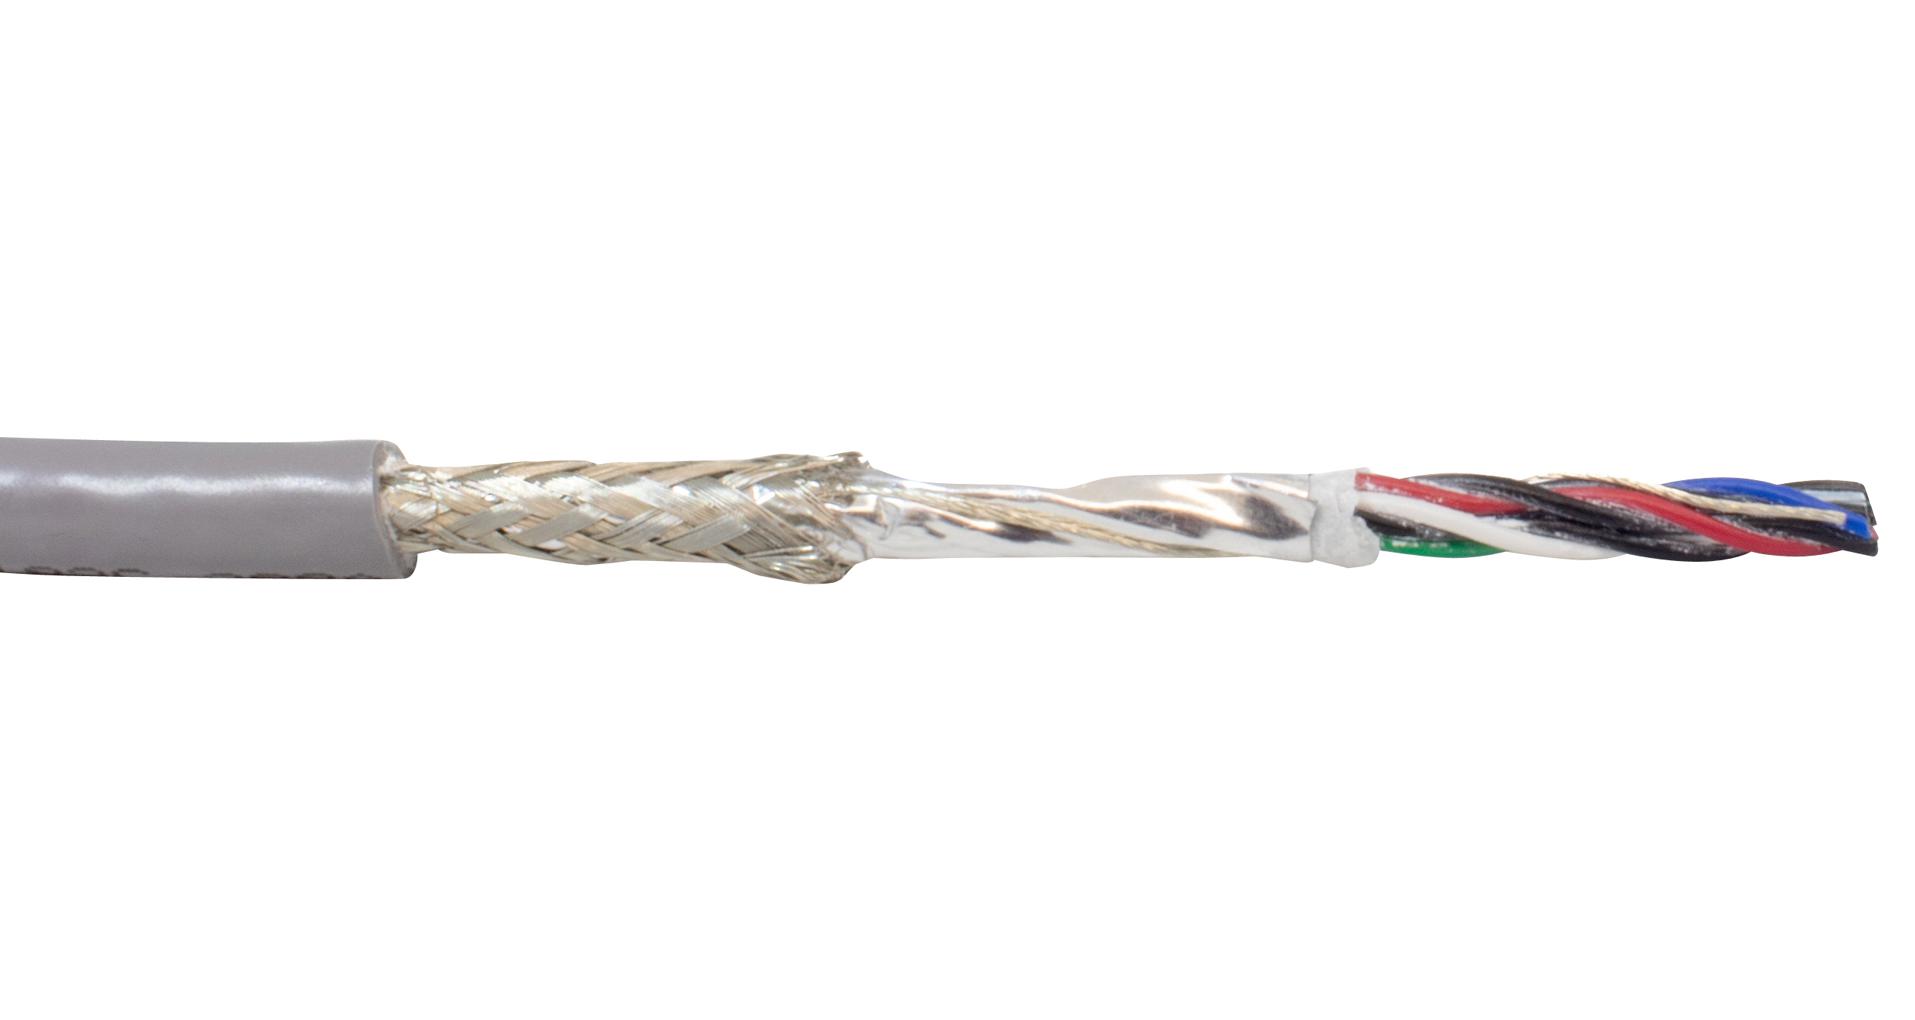 86502CY SL001 SHLD MULTIPAIR, 2 PAIR, 26AWG, 305M ALPHA WIRE